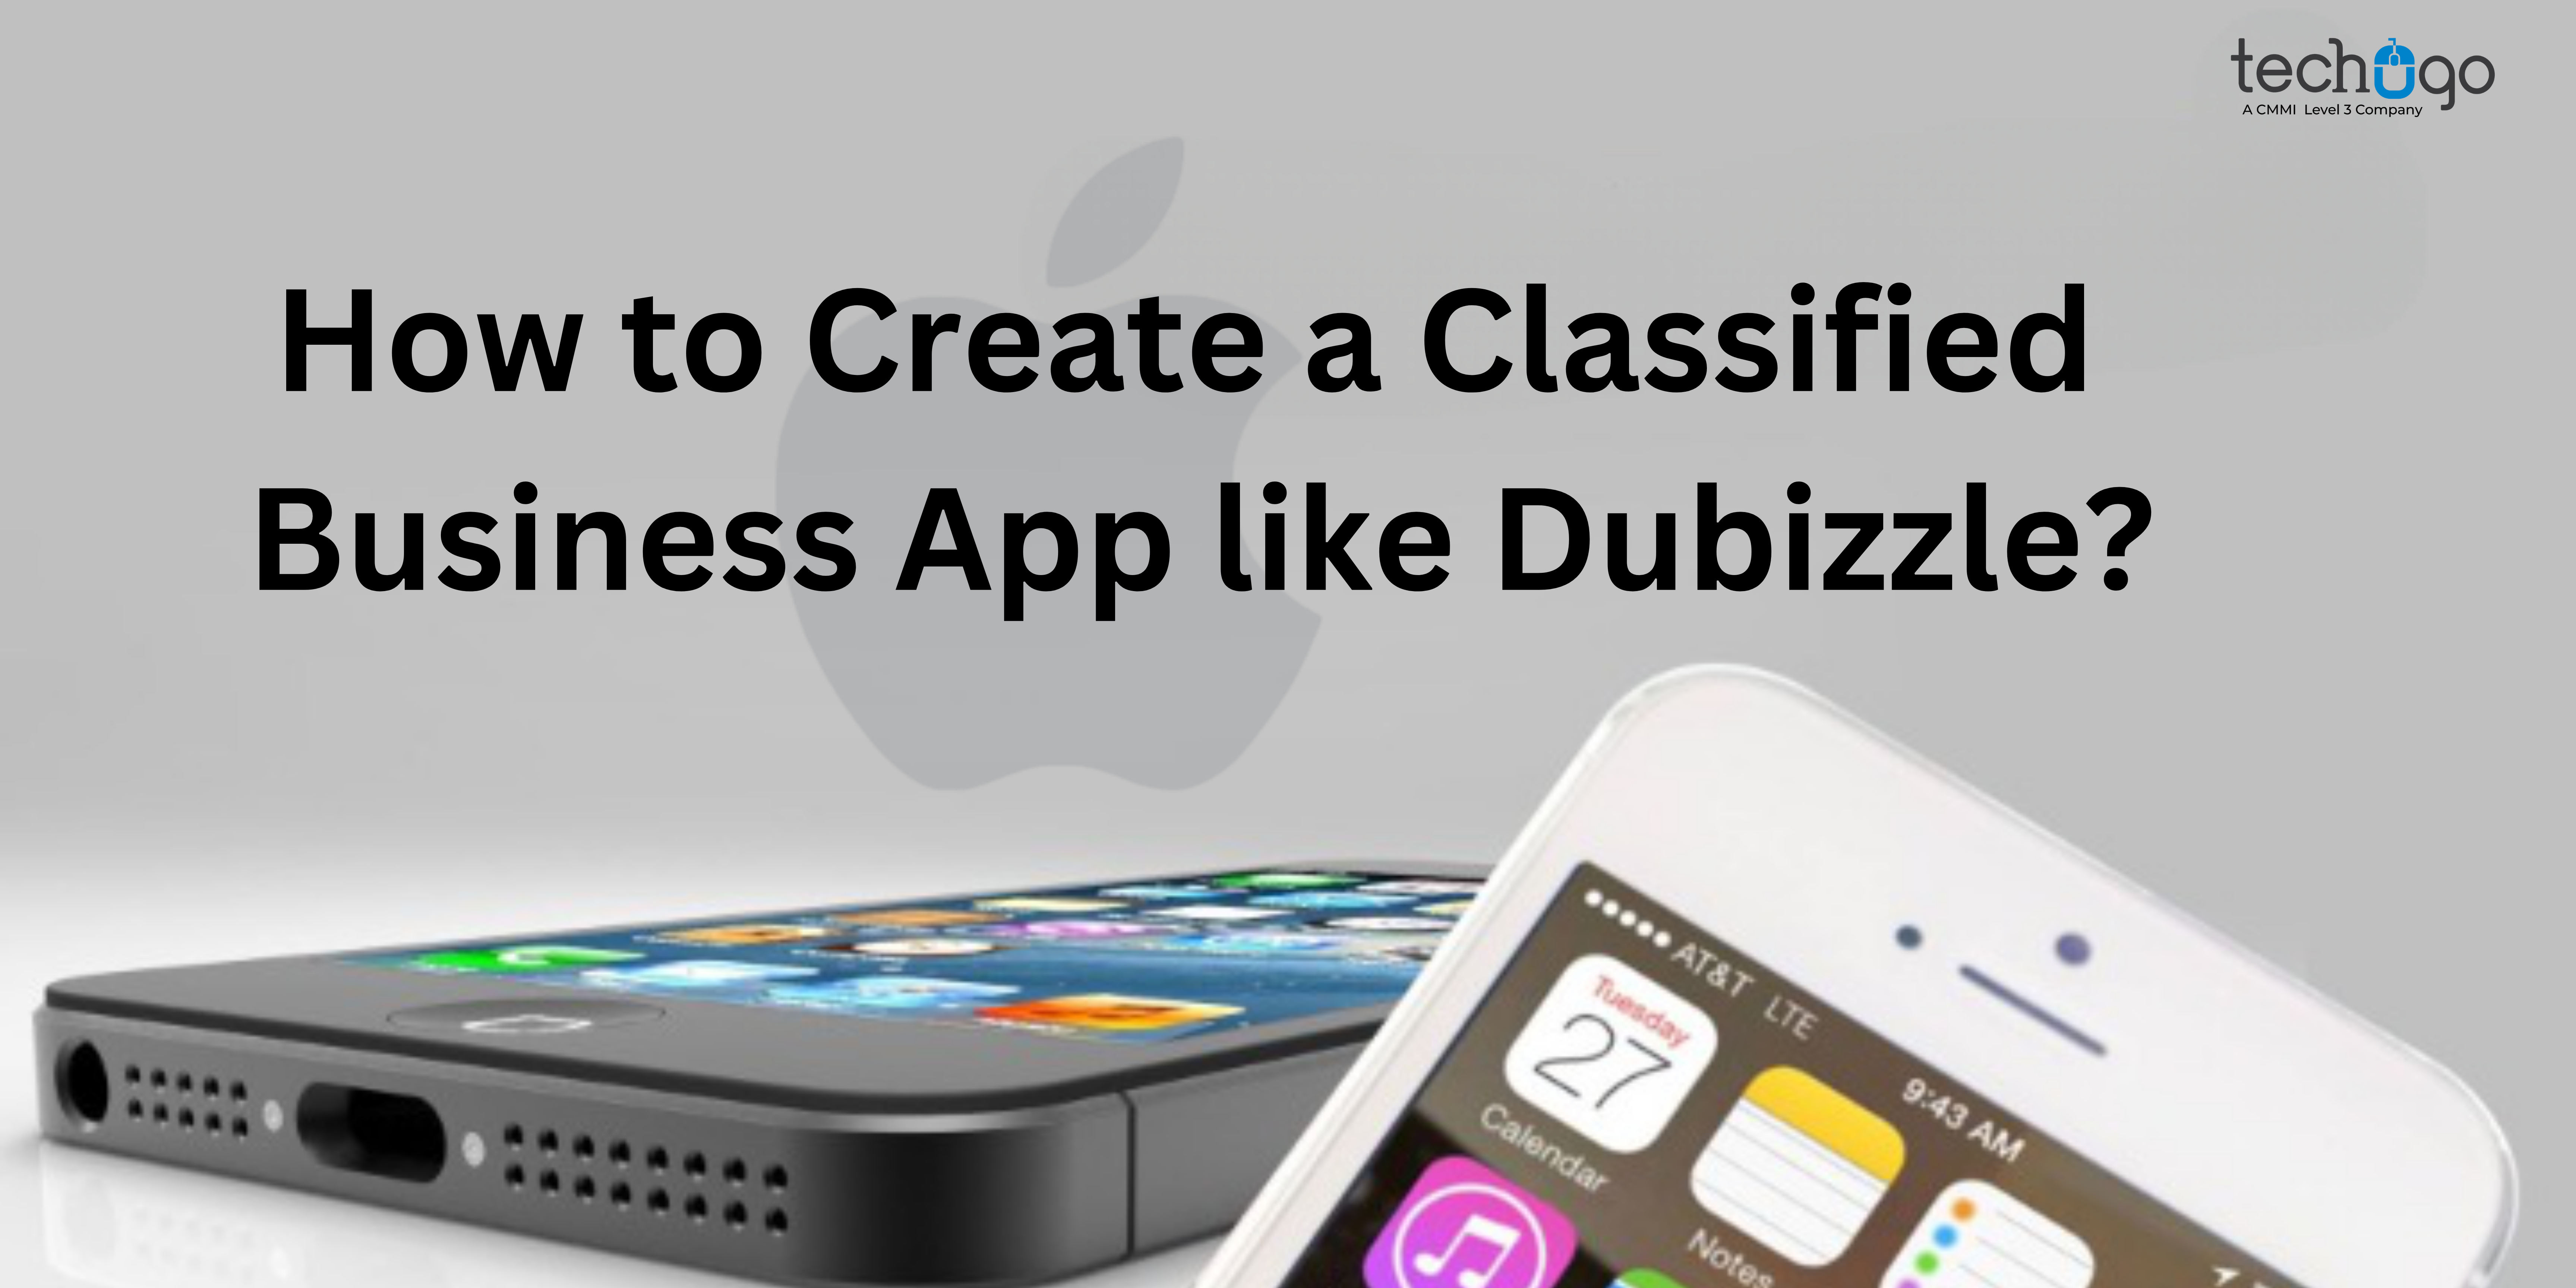 How to Create a Classified Business App like Dubizzle?